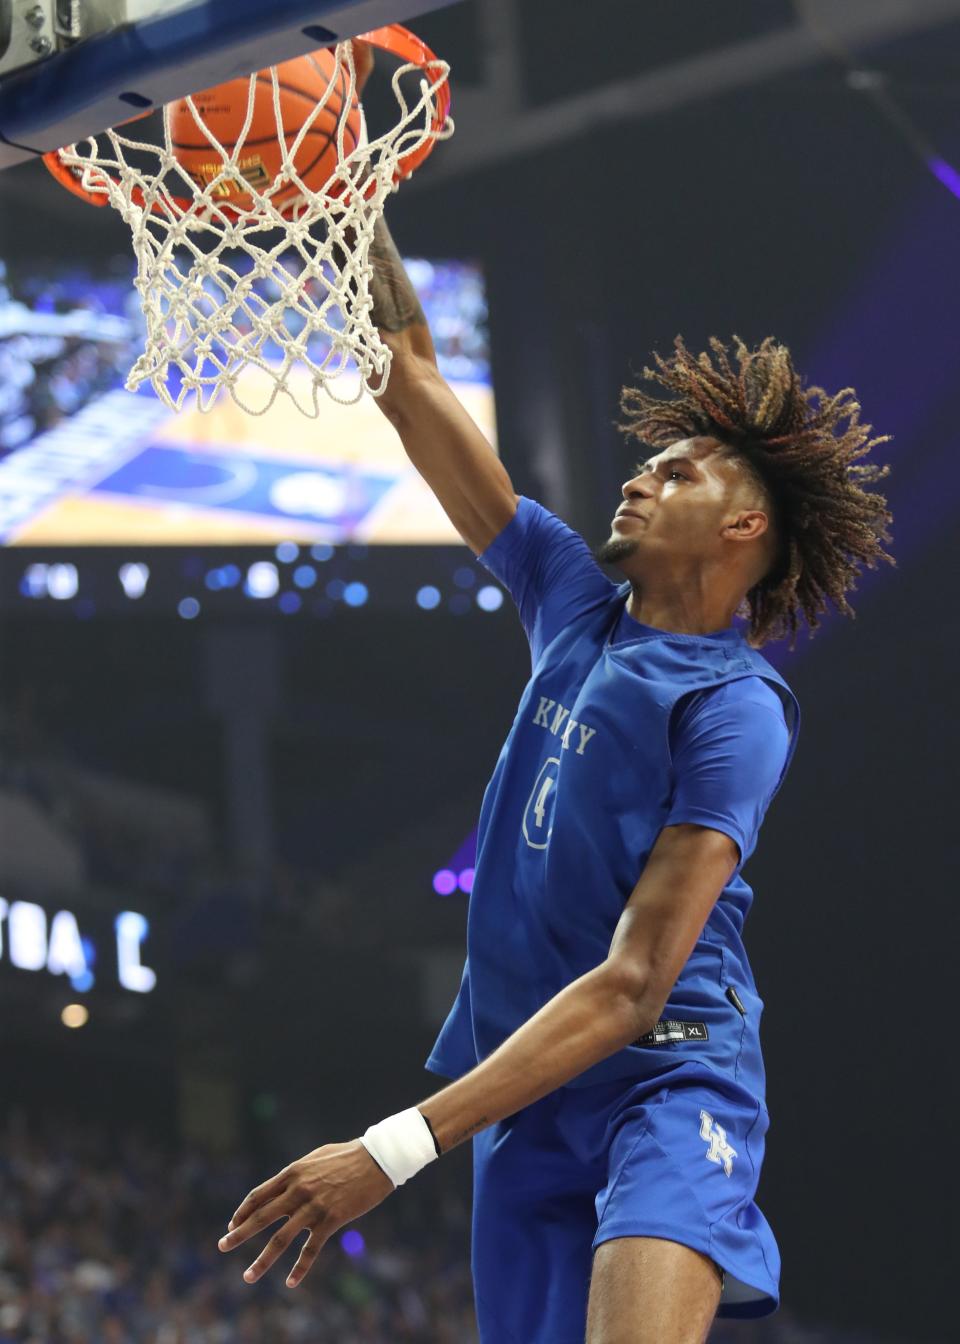 Kentucky’s Daimion Collins slams one home during Big Blue Madness in October 2022. He now plays at LSU.